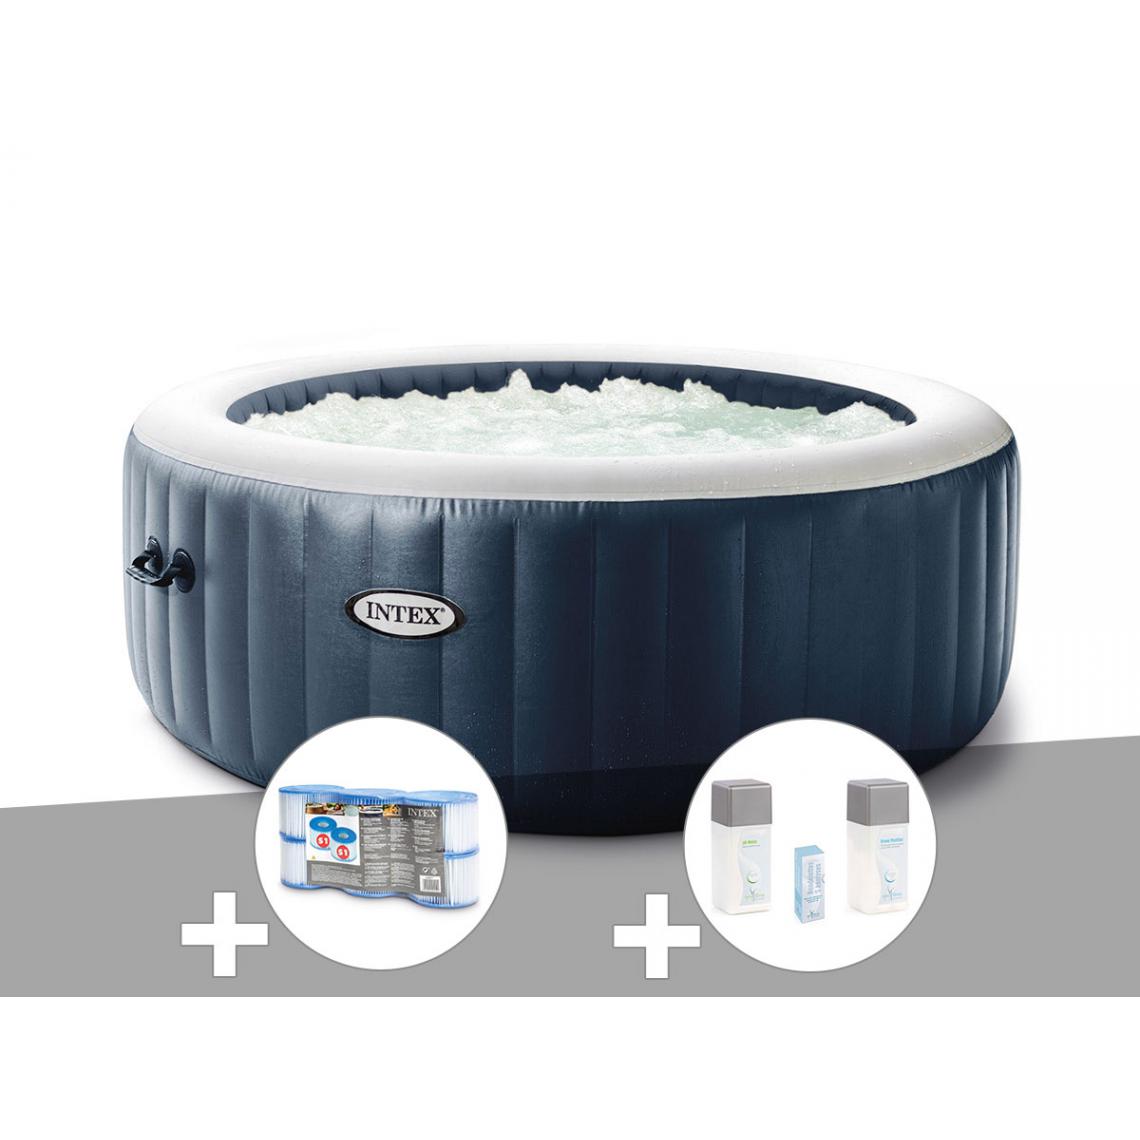 Intex - Kit spa gonflable Intex PureSpa Blue Navy rond Bulles 4 places + 6 filtres + Kit traitement brome - Spa gonflable